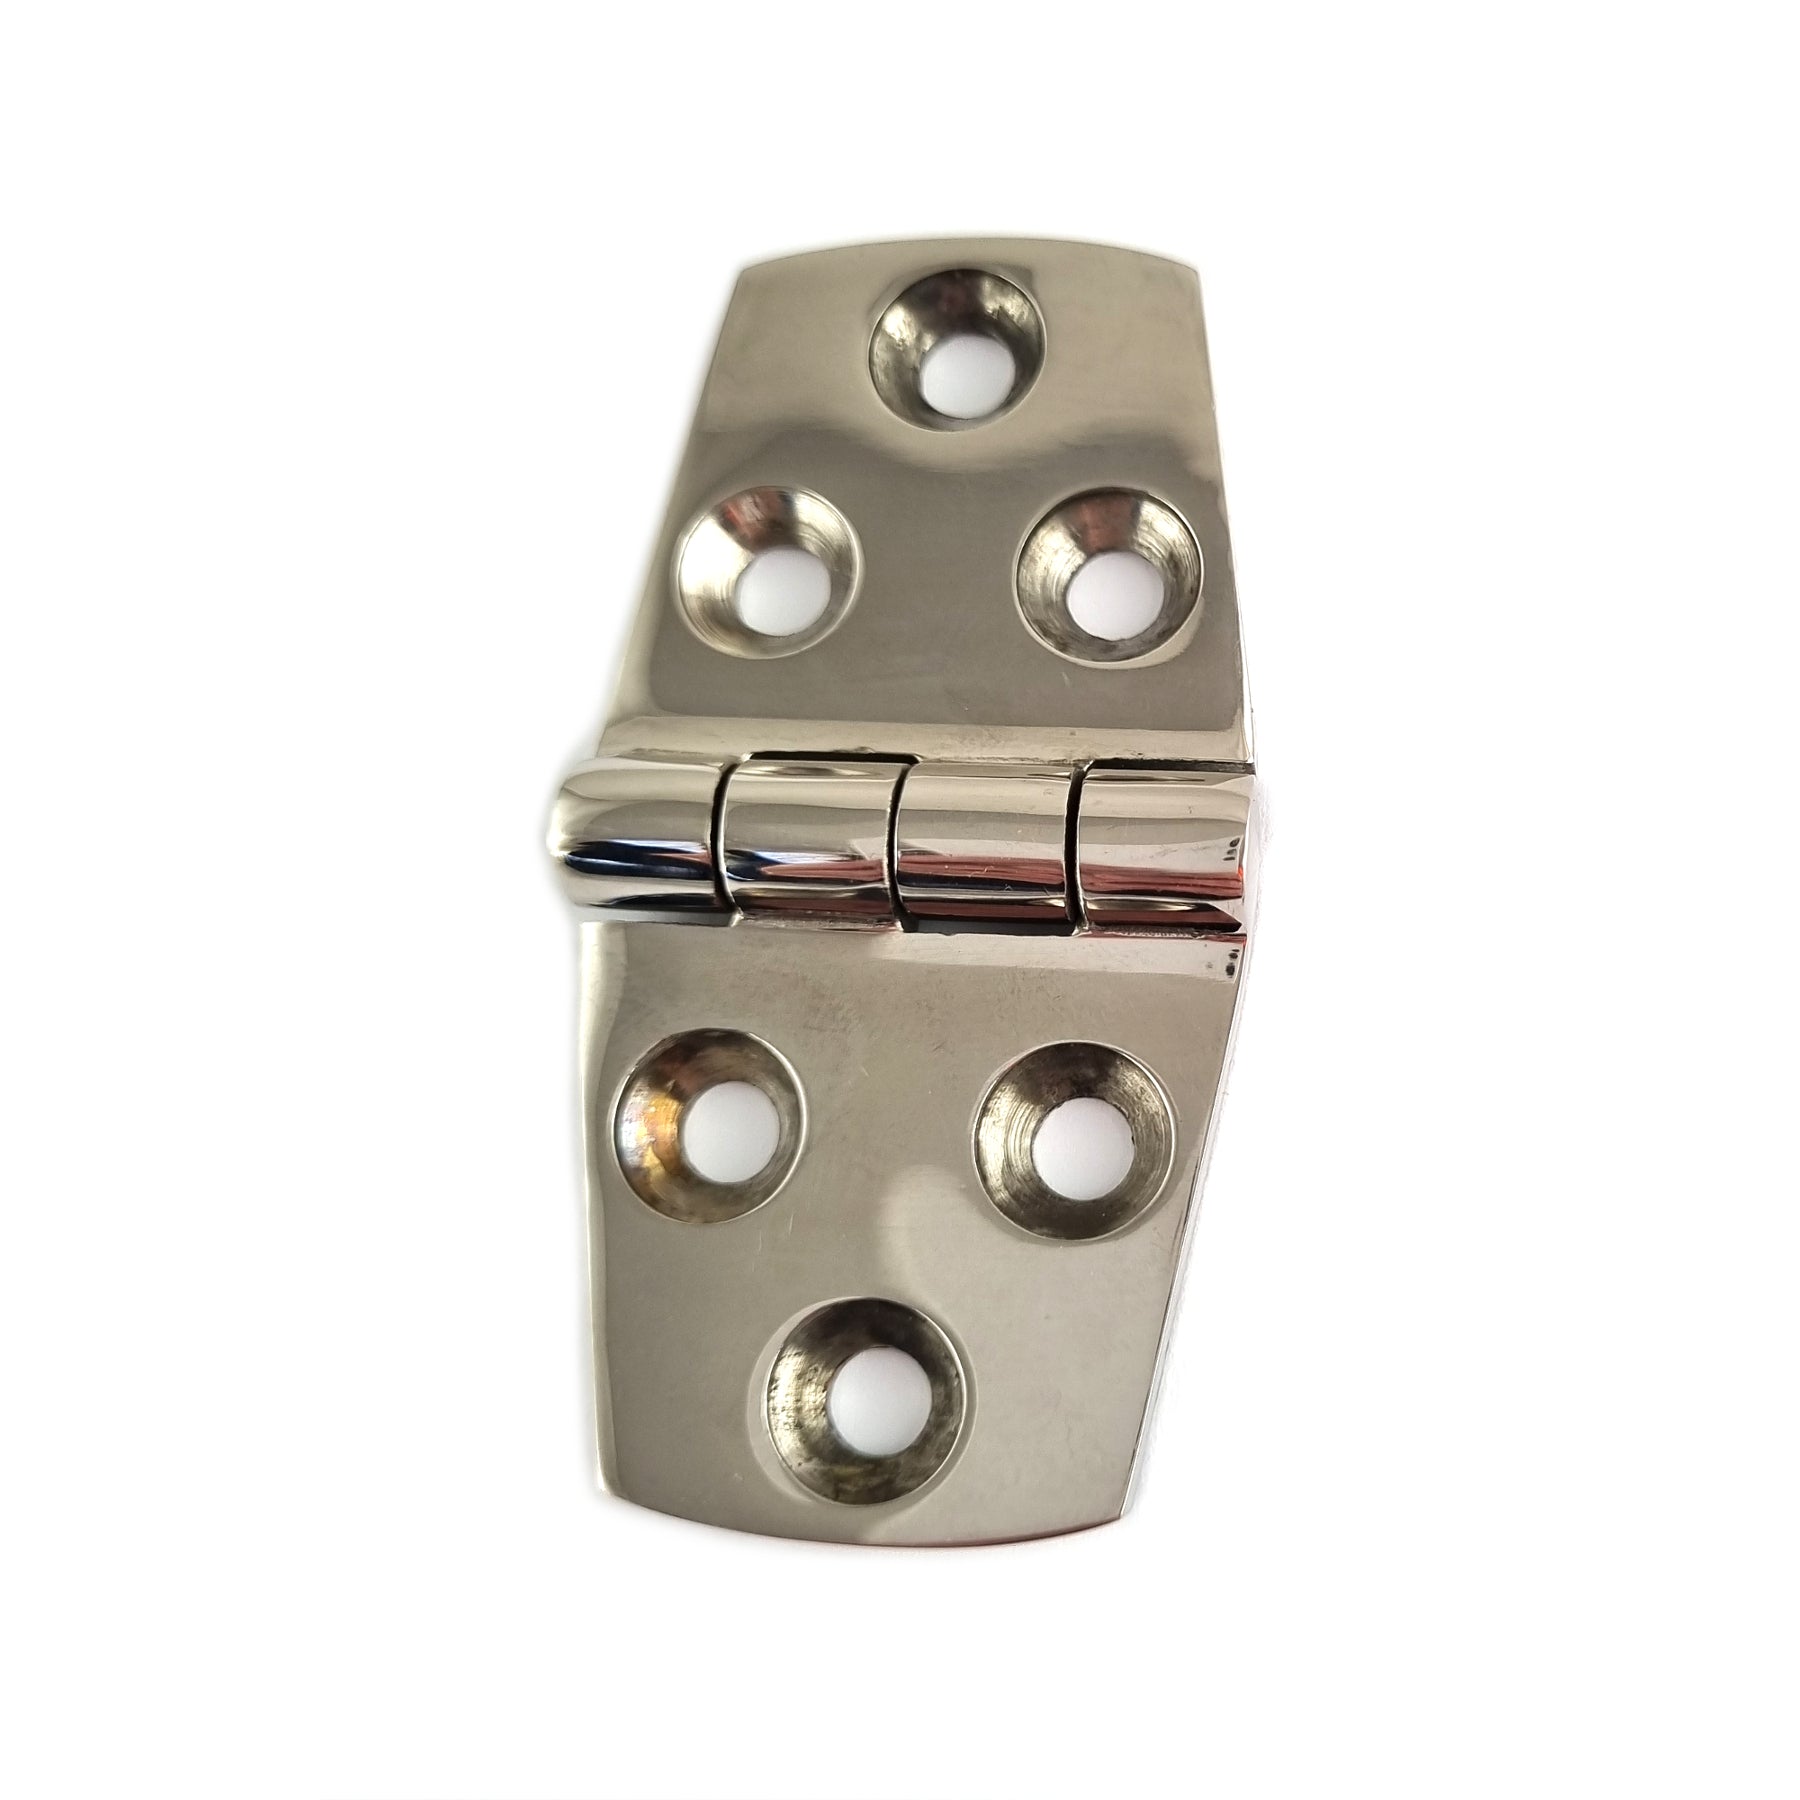 Flat Hinges in Stainless Steel. Size: 74mm x 38mm. Shop online chain.com.au. Shipping Australia wide.